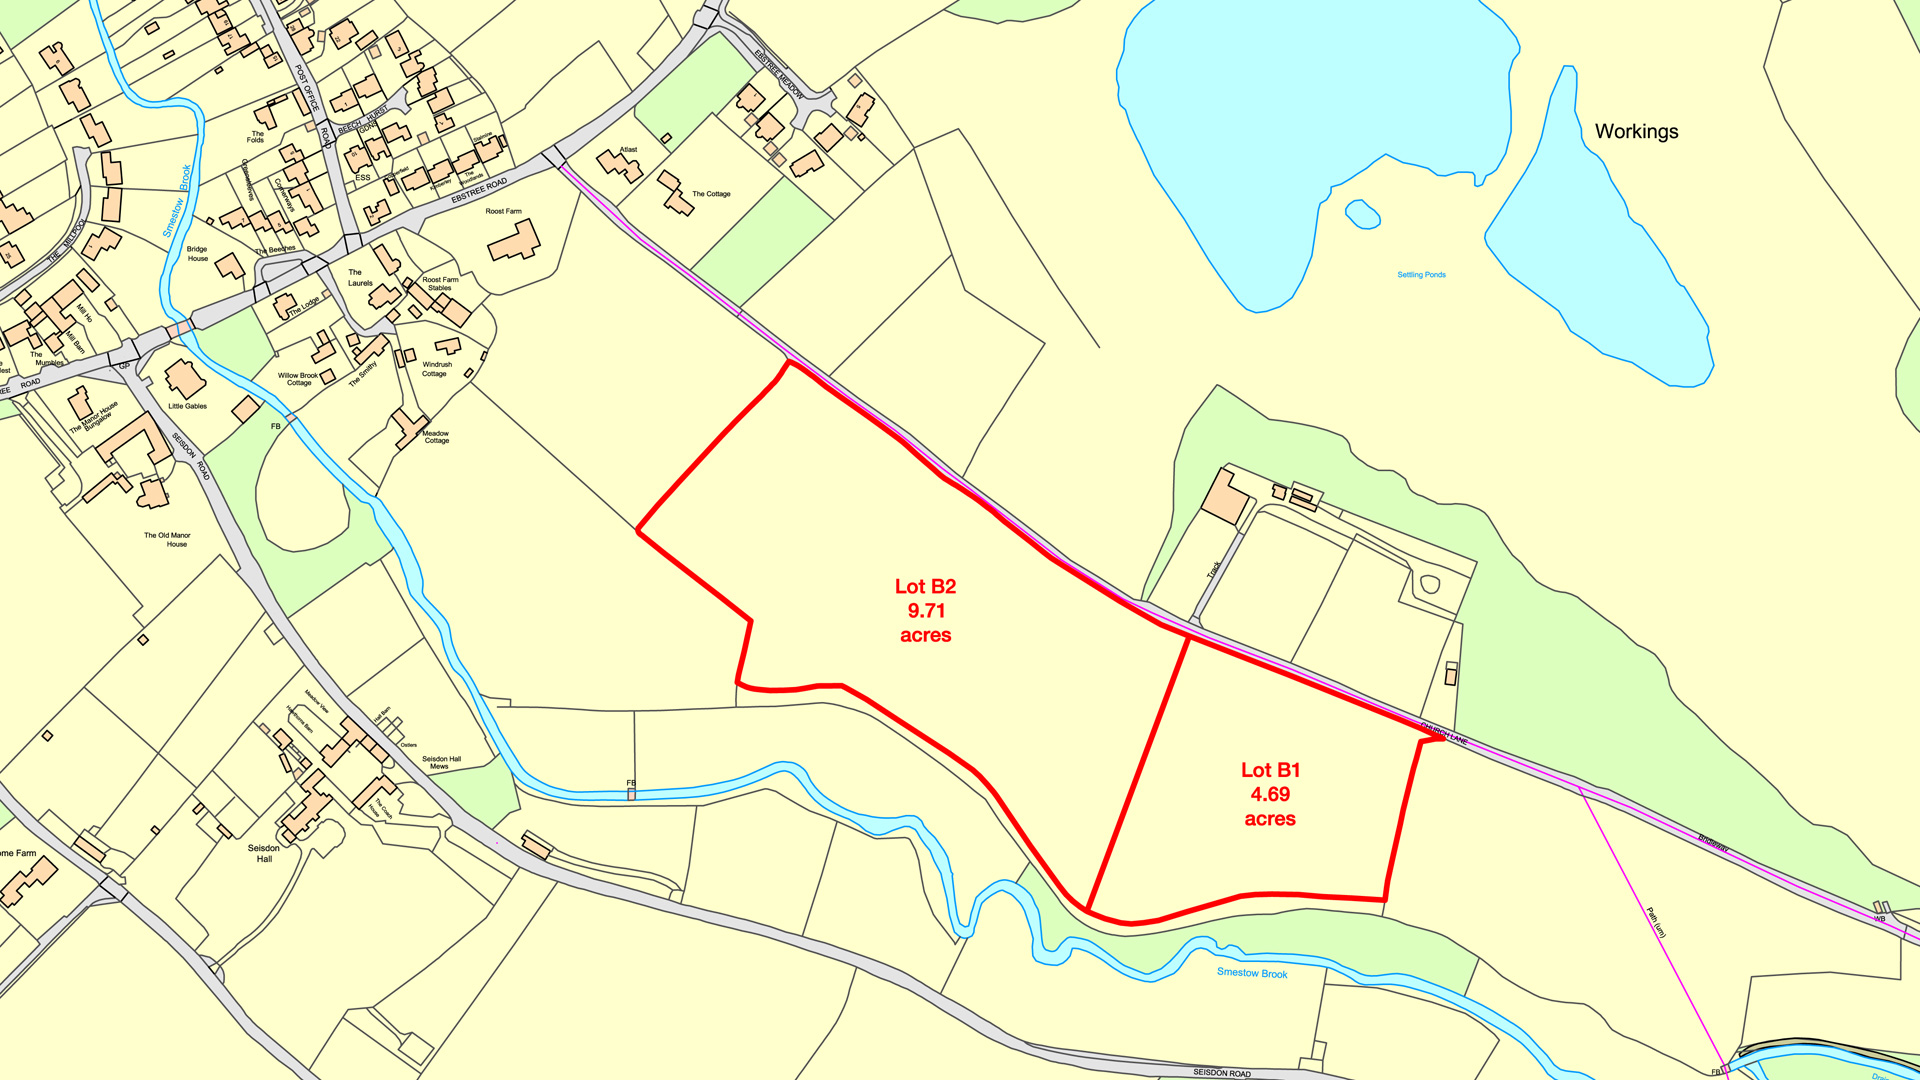 Land for sale in Trysull site plan